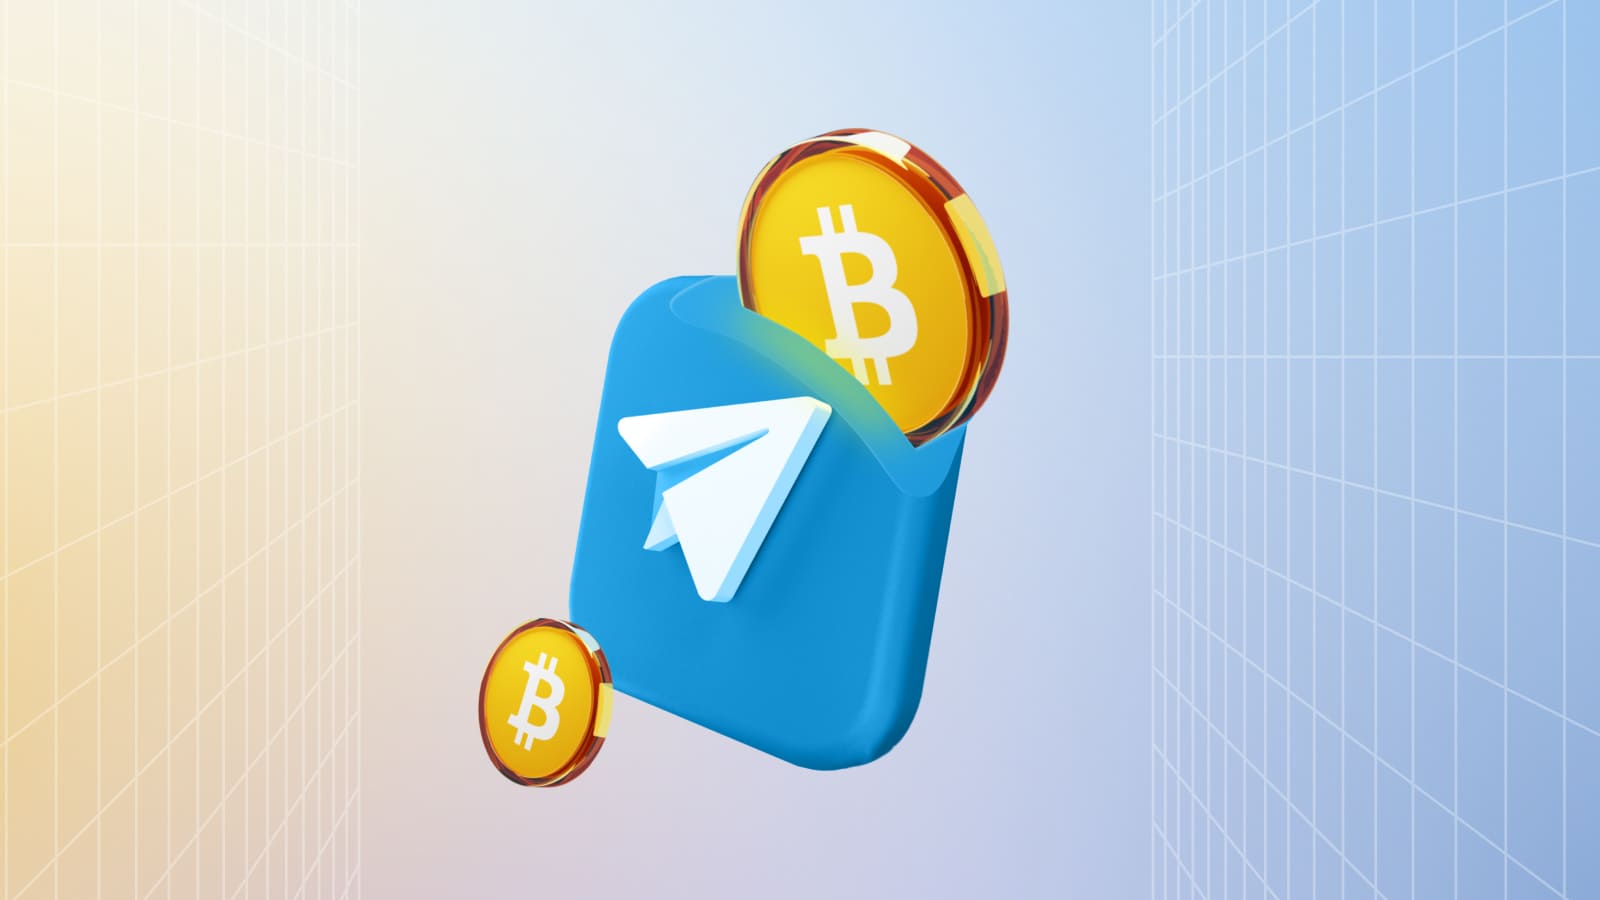 In Telegram, payments can be accepted in 3 ways: via API, permanent link, and manual invoices.